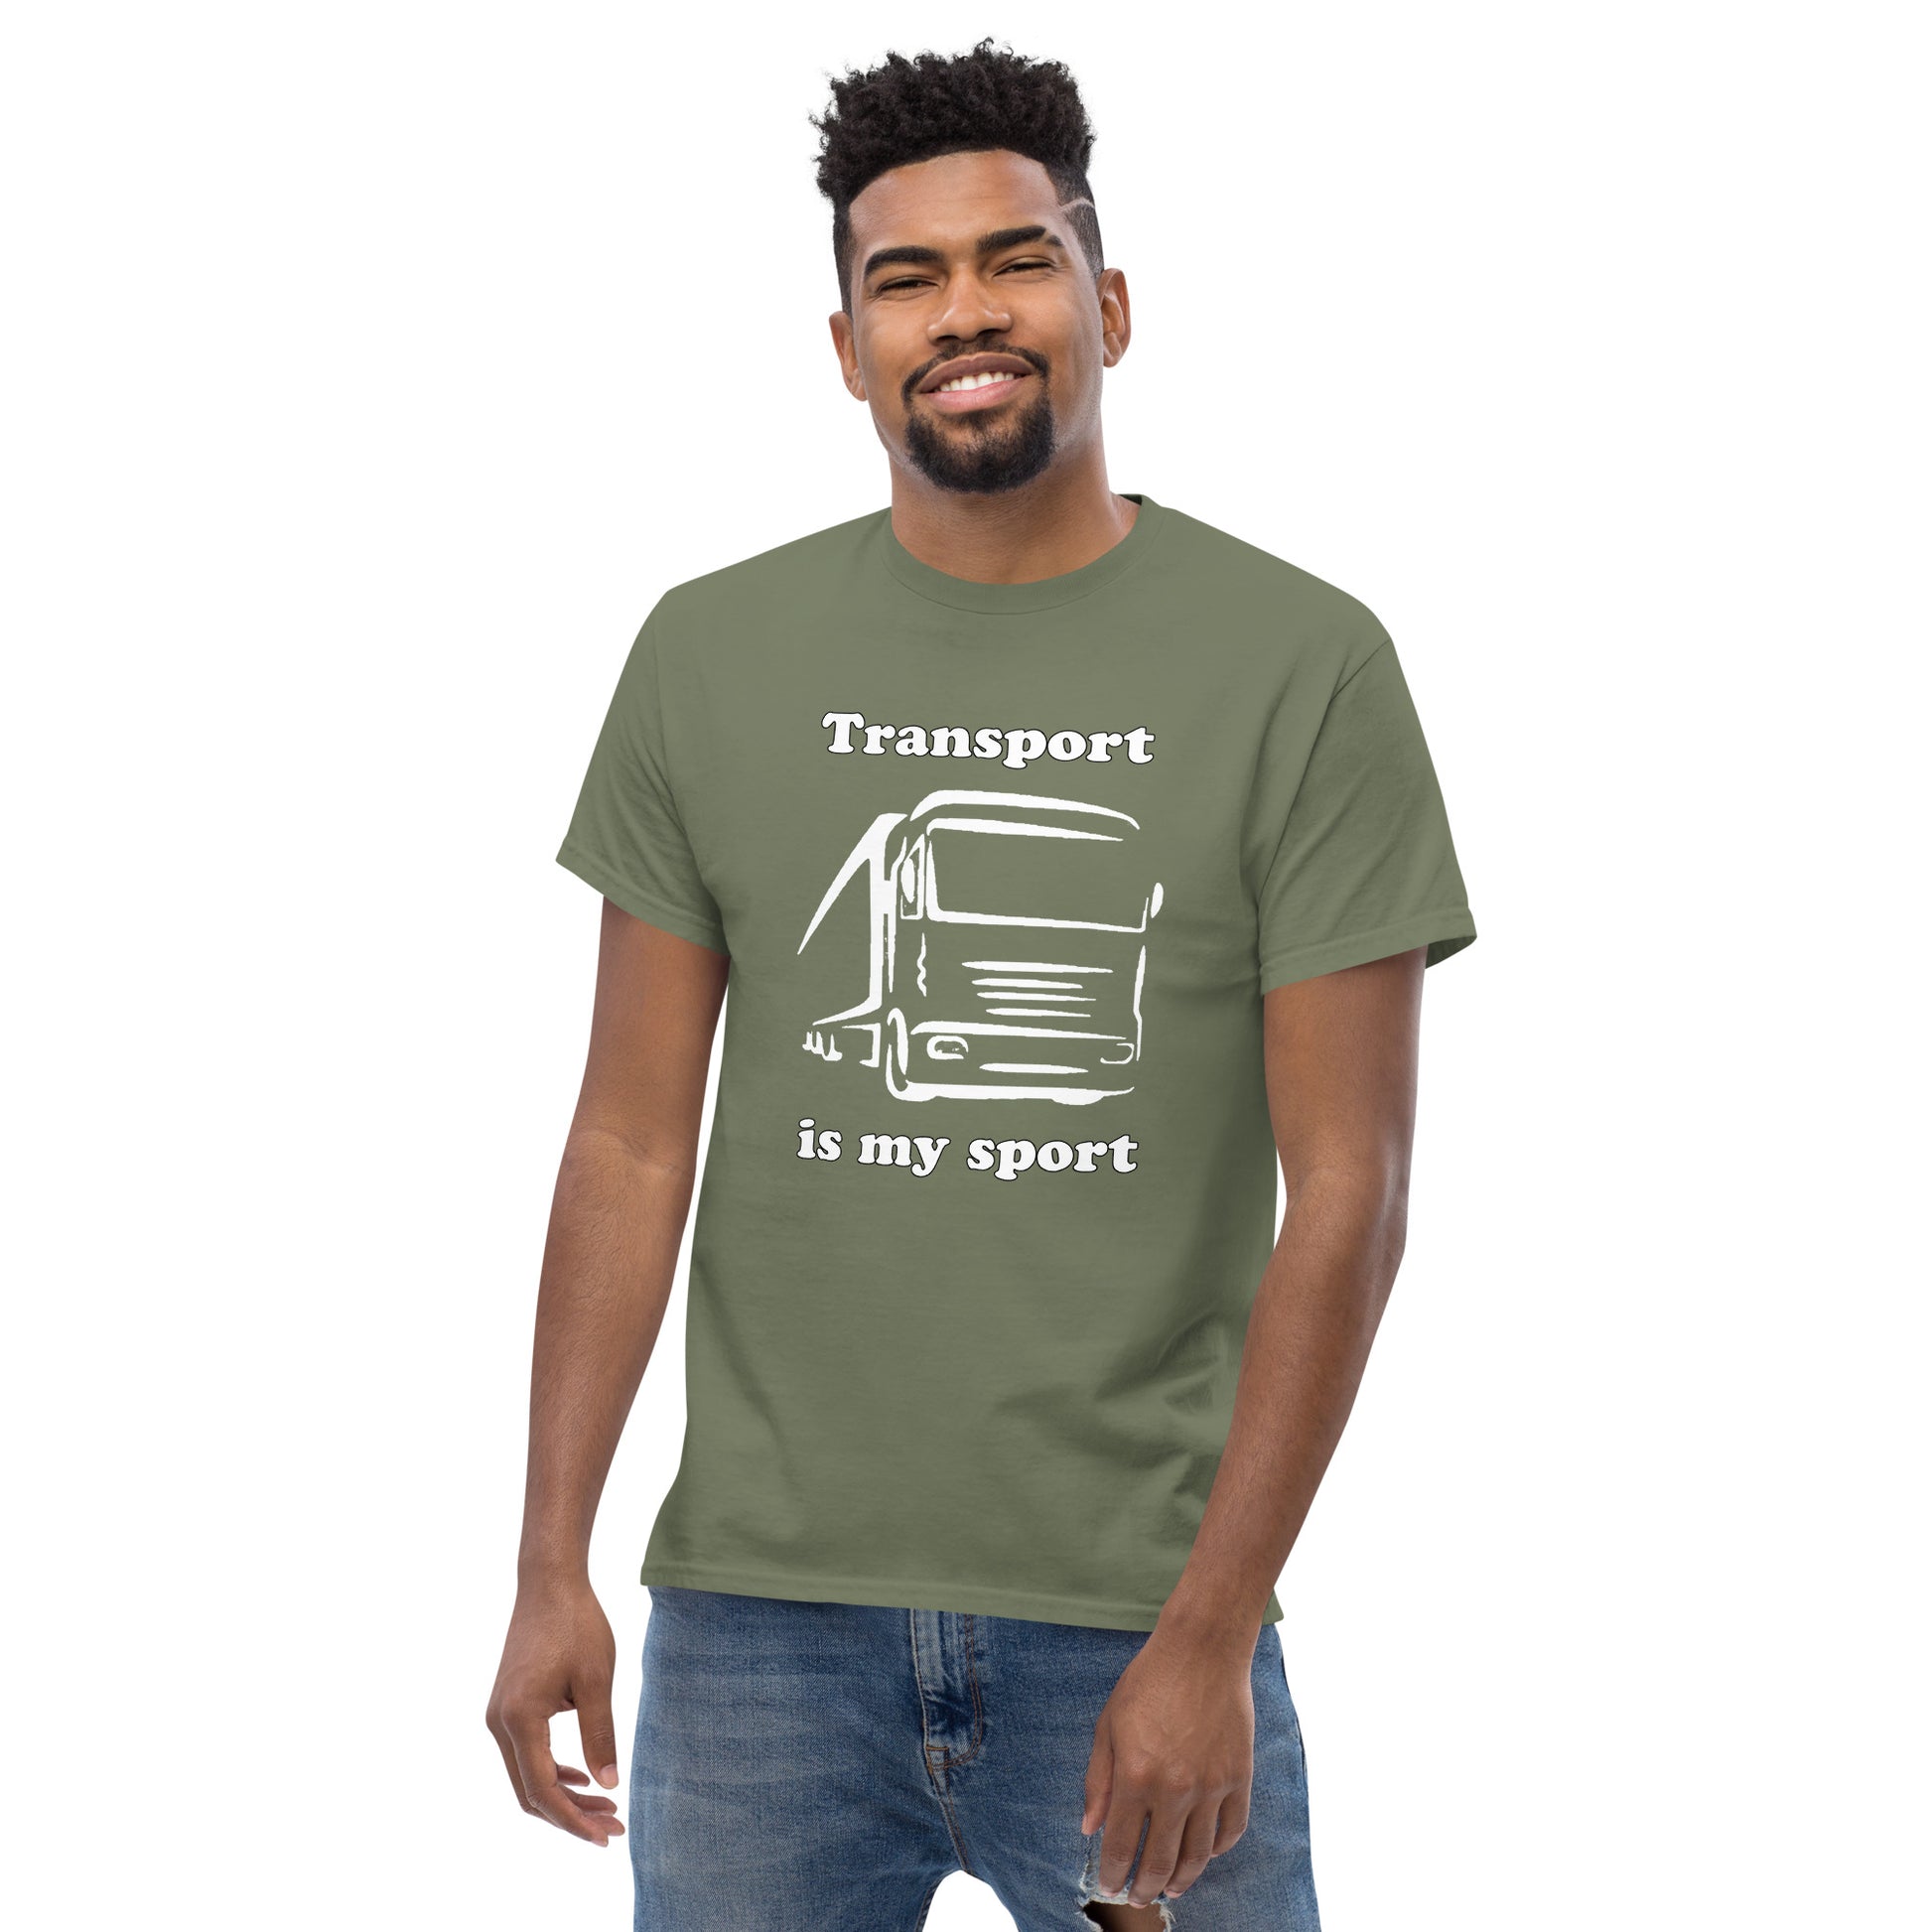 Man with military green t-shirt with picture of truck and text "Transport is my sport"